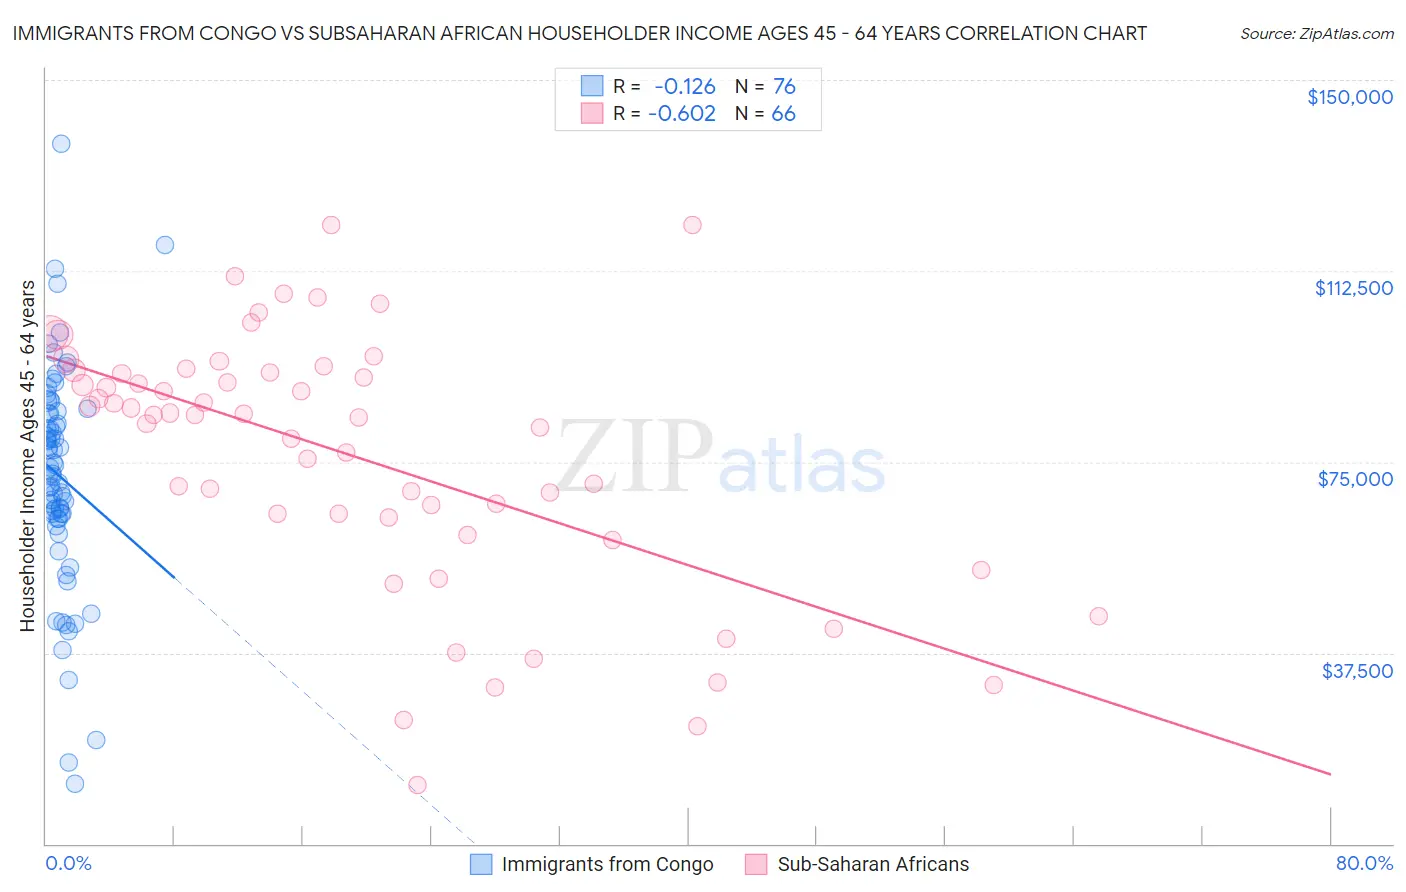 Immigrants from Congo vs Subsaharan African Householder Income Ages 45 - 64 years